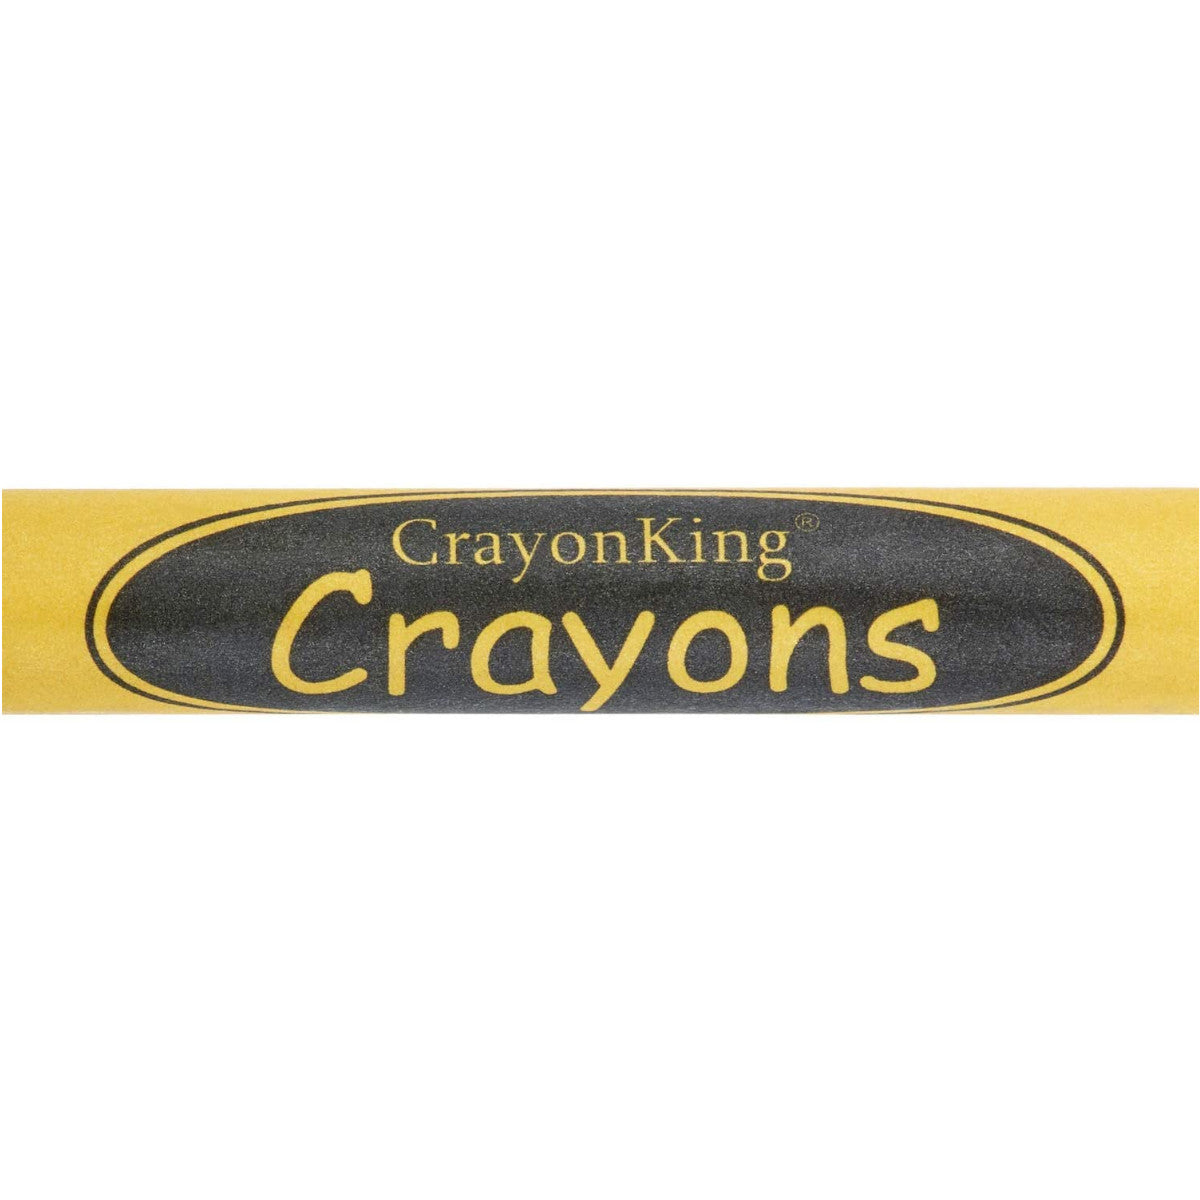 Trail maker 100 Pack Crayons in Bulk for Kids, Classroom